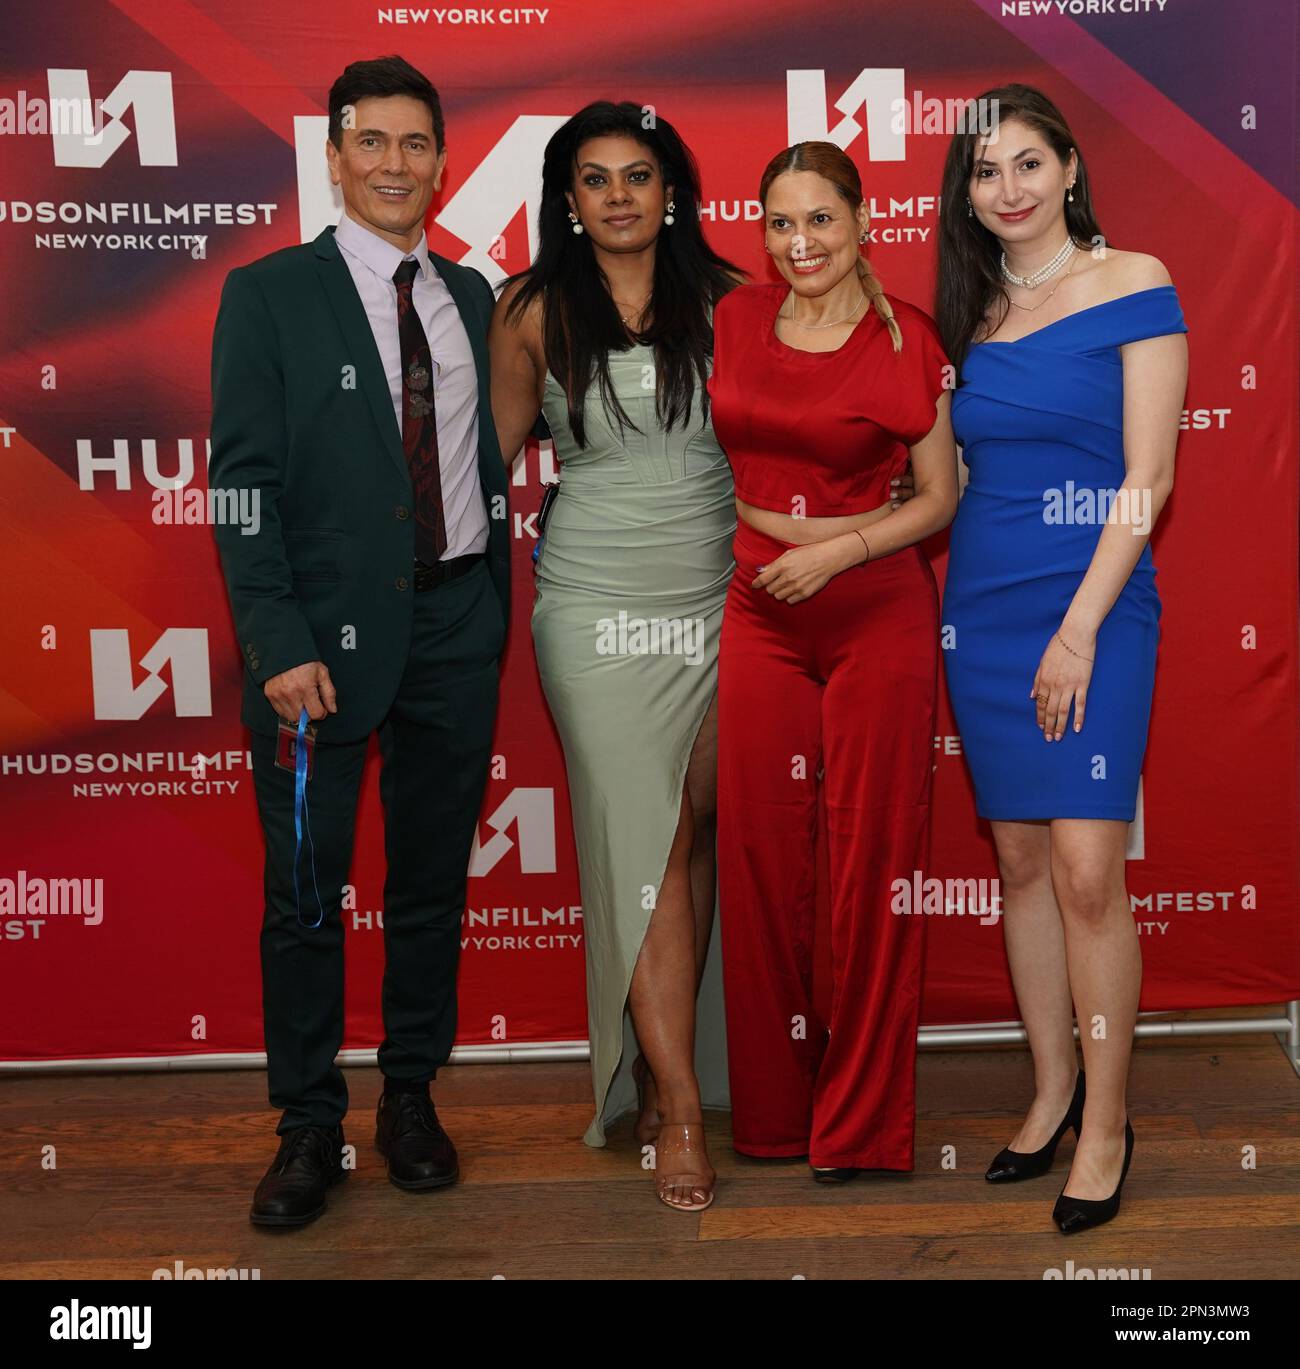 April 16, 2023, New York, New York: (NEW) Hudson International Film Festival in New York. April 15, 2023, New York, USA: The Hudson International Film Festival took place from April 13 to 15 in New York. The Best Film of the Year Award was presented to ''ACTIVISMO, '' Dissidence in Cuba, Directed by Philip Sugden and Carole Elchert. This is a documentary film about Cuban Artist use art as Activism. The Top Movie Award was presented to ROBIN HOOD, Directed by Leslie Kincaid Burby. There was the presence of Marc Marlon, the founder and president of Hudson Film Festival and many other artists lik Stock Photo